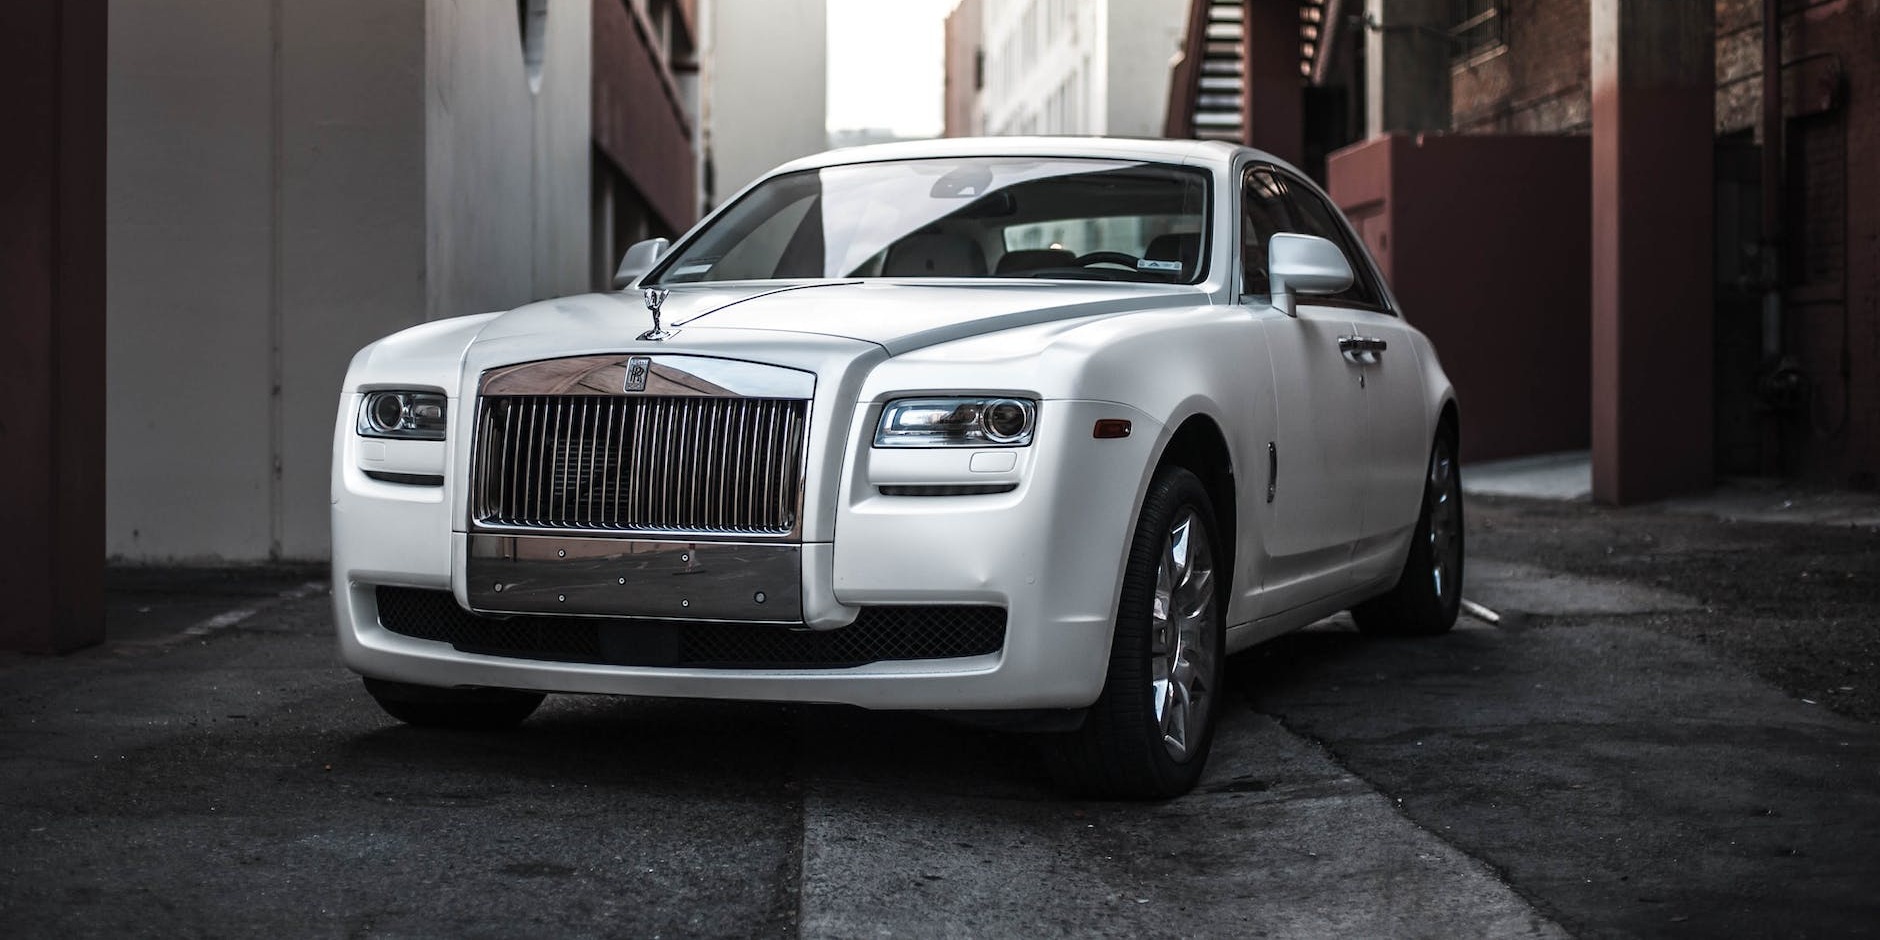 Exploring the Luxury Features of the Rolls Royce Phantom: What Sets It Apart?